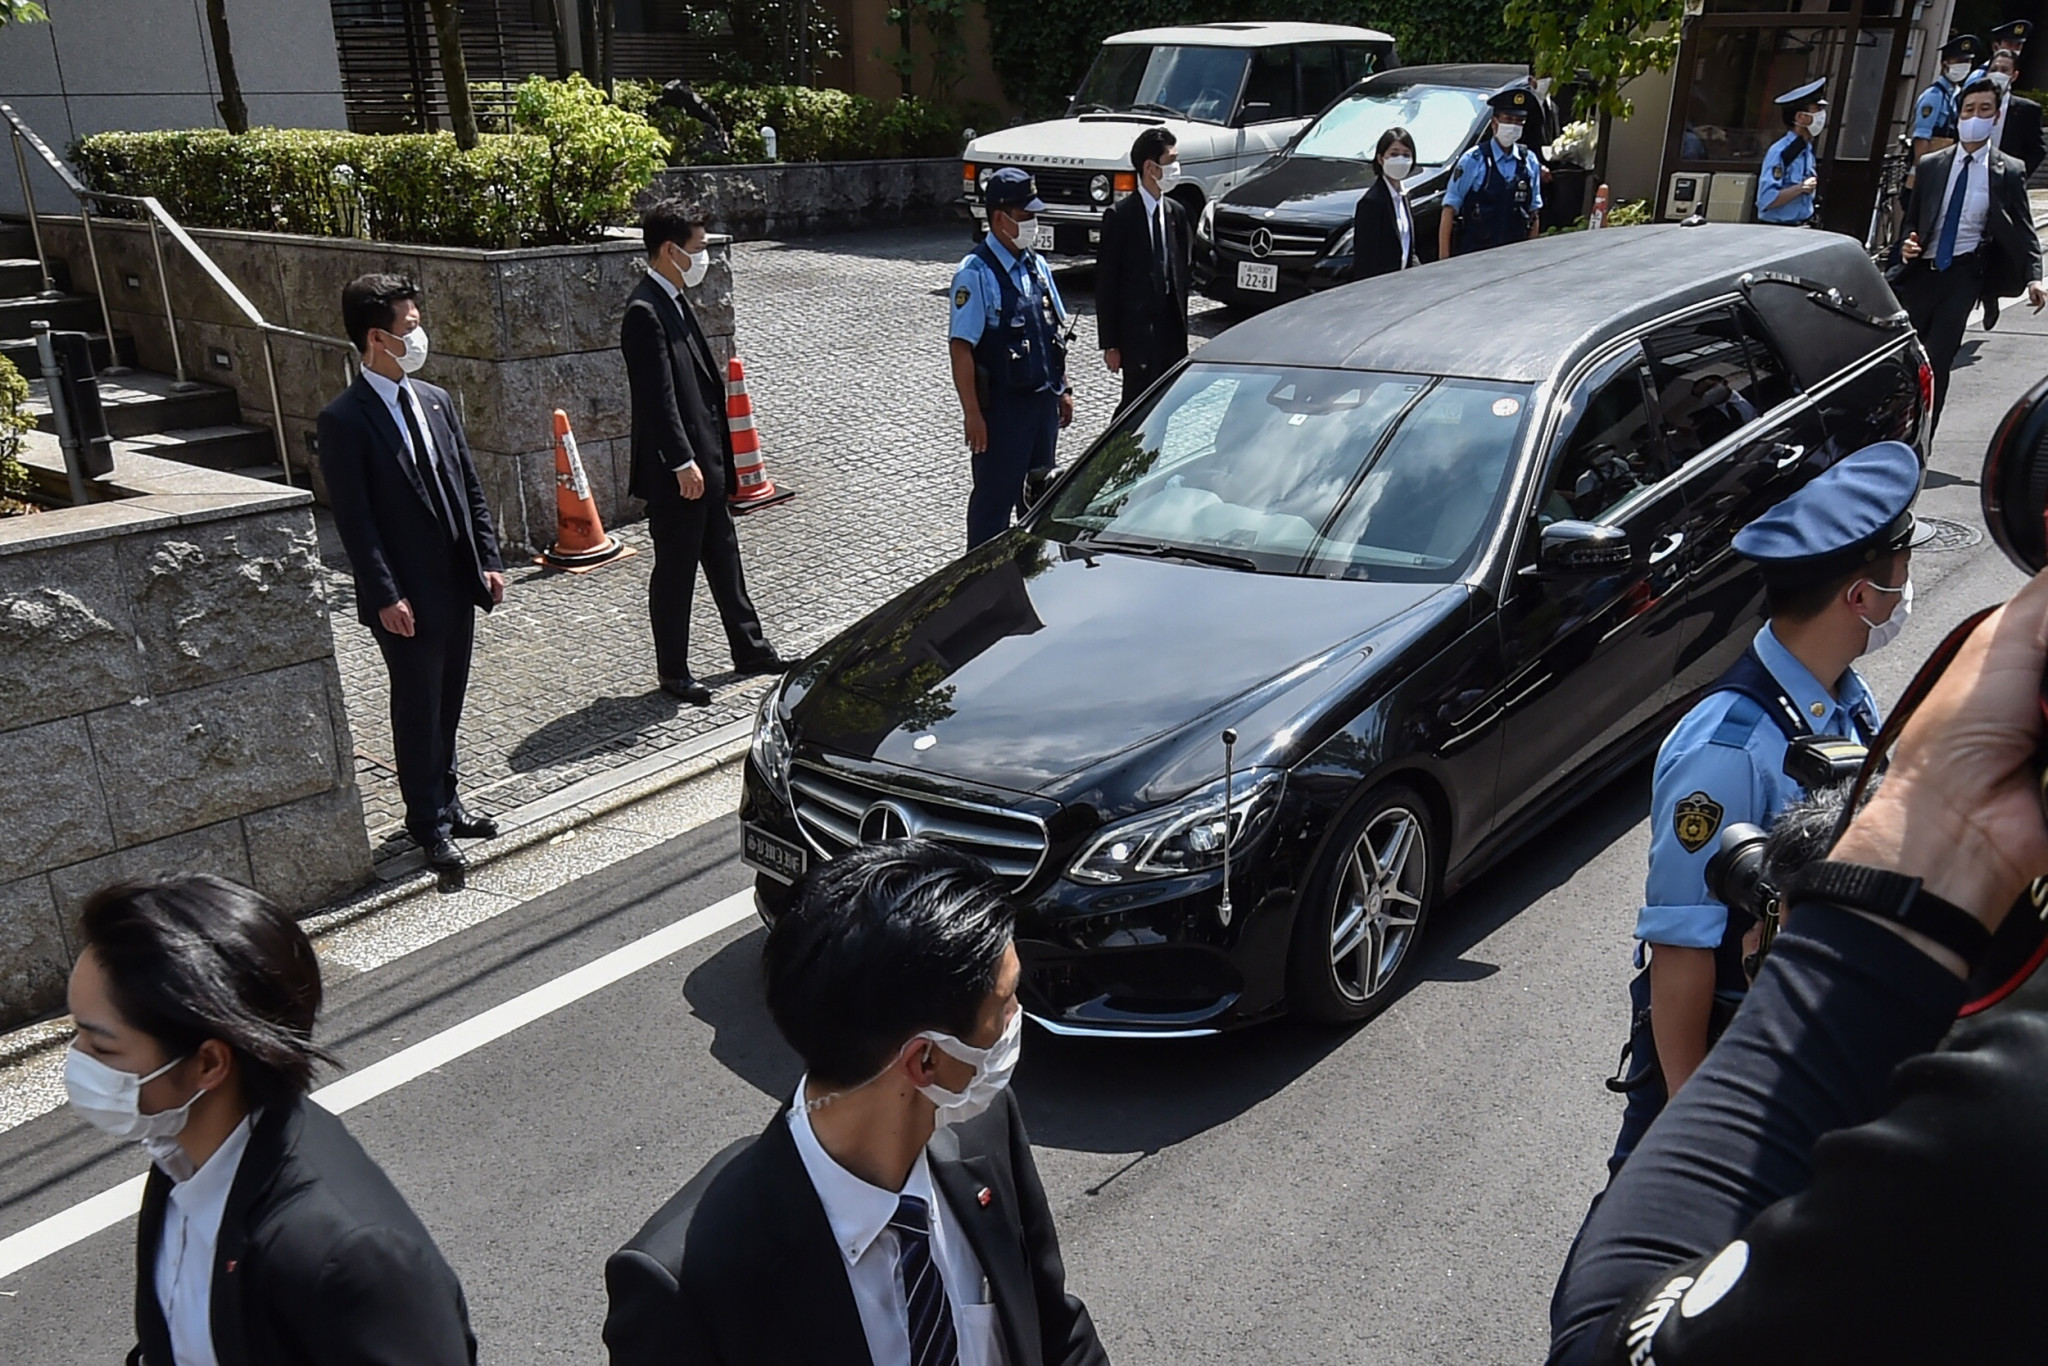 Abe "led from the front" in Tokyo 2020 bid as ex-Japan PM's body returned home